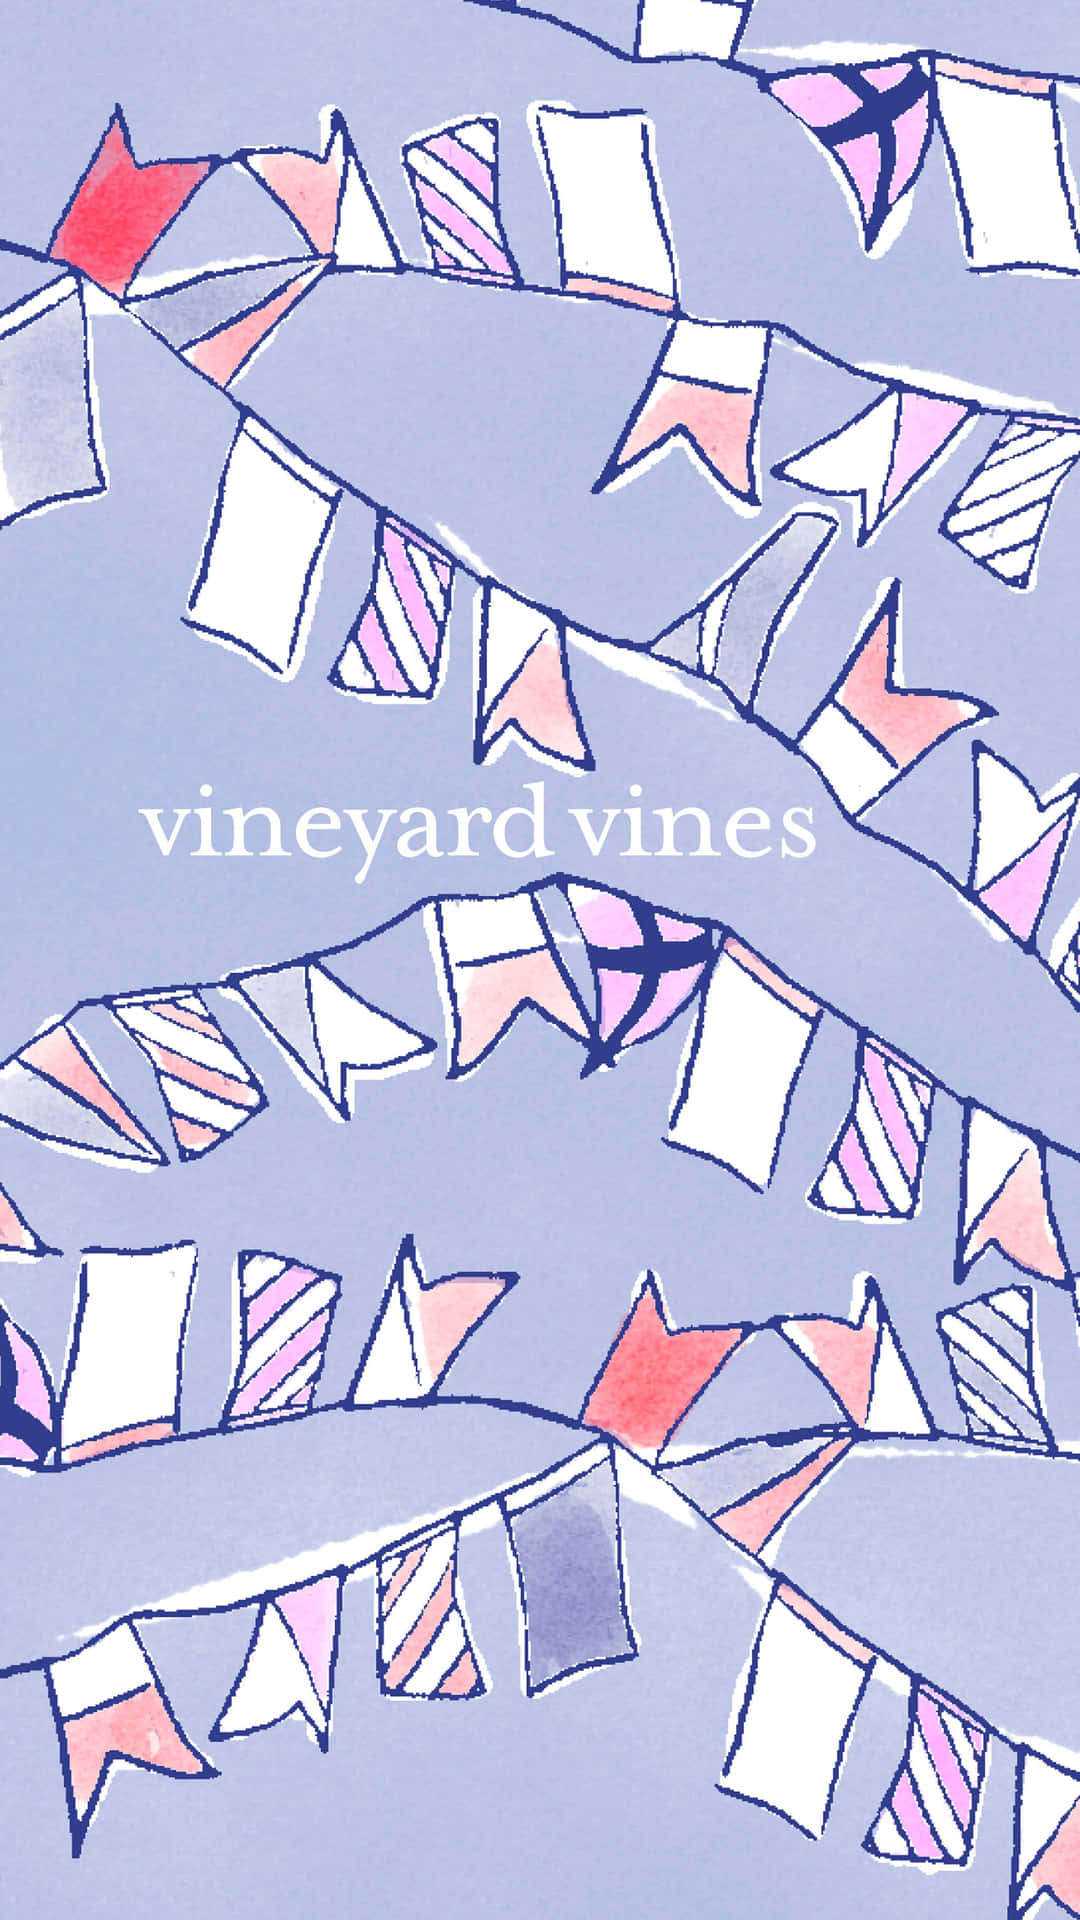 A Drawing Of Flags With The Words Vineyard Vines